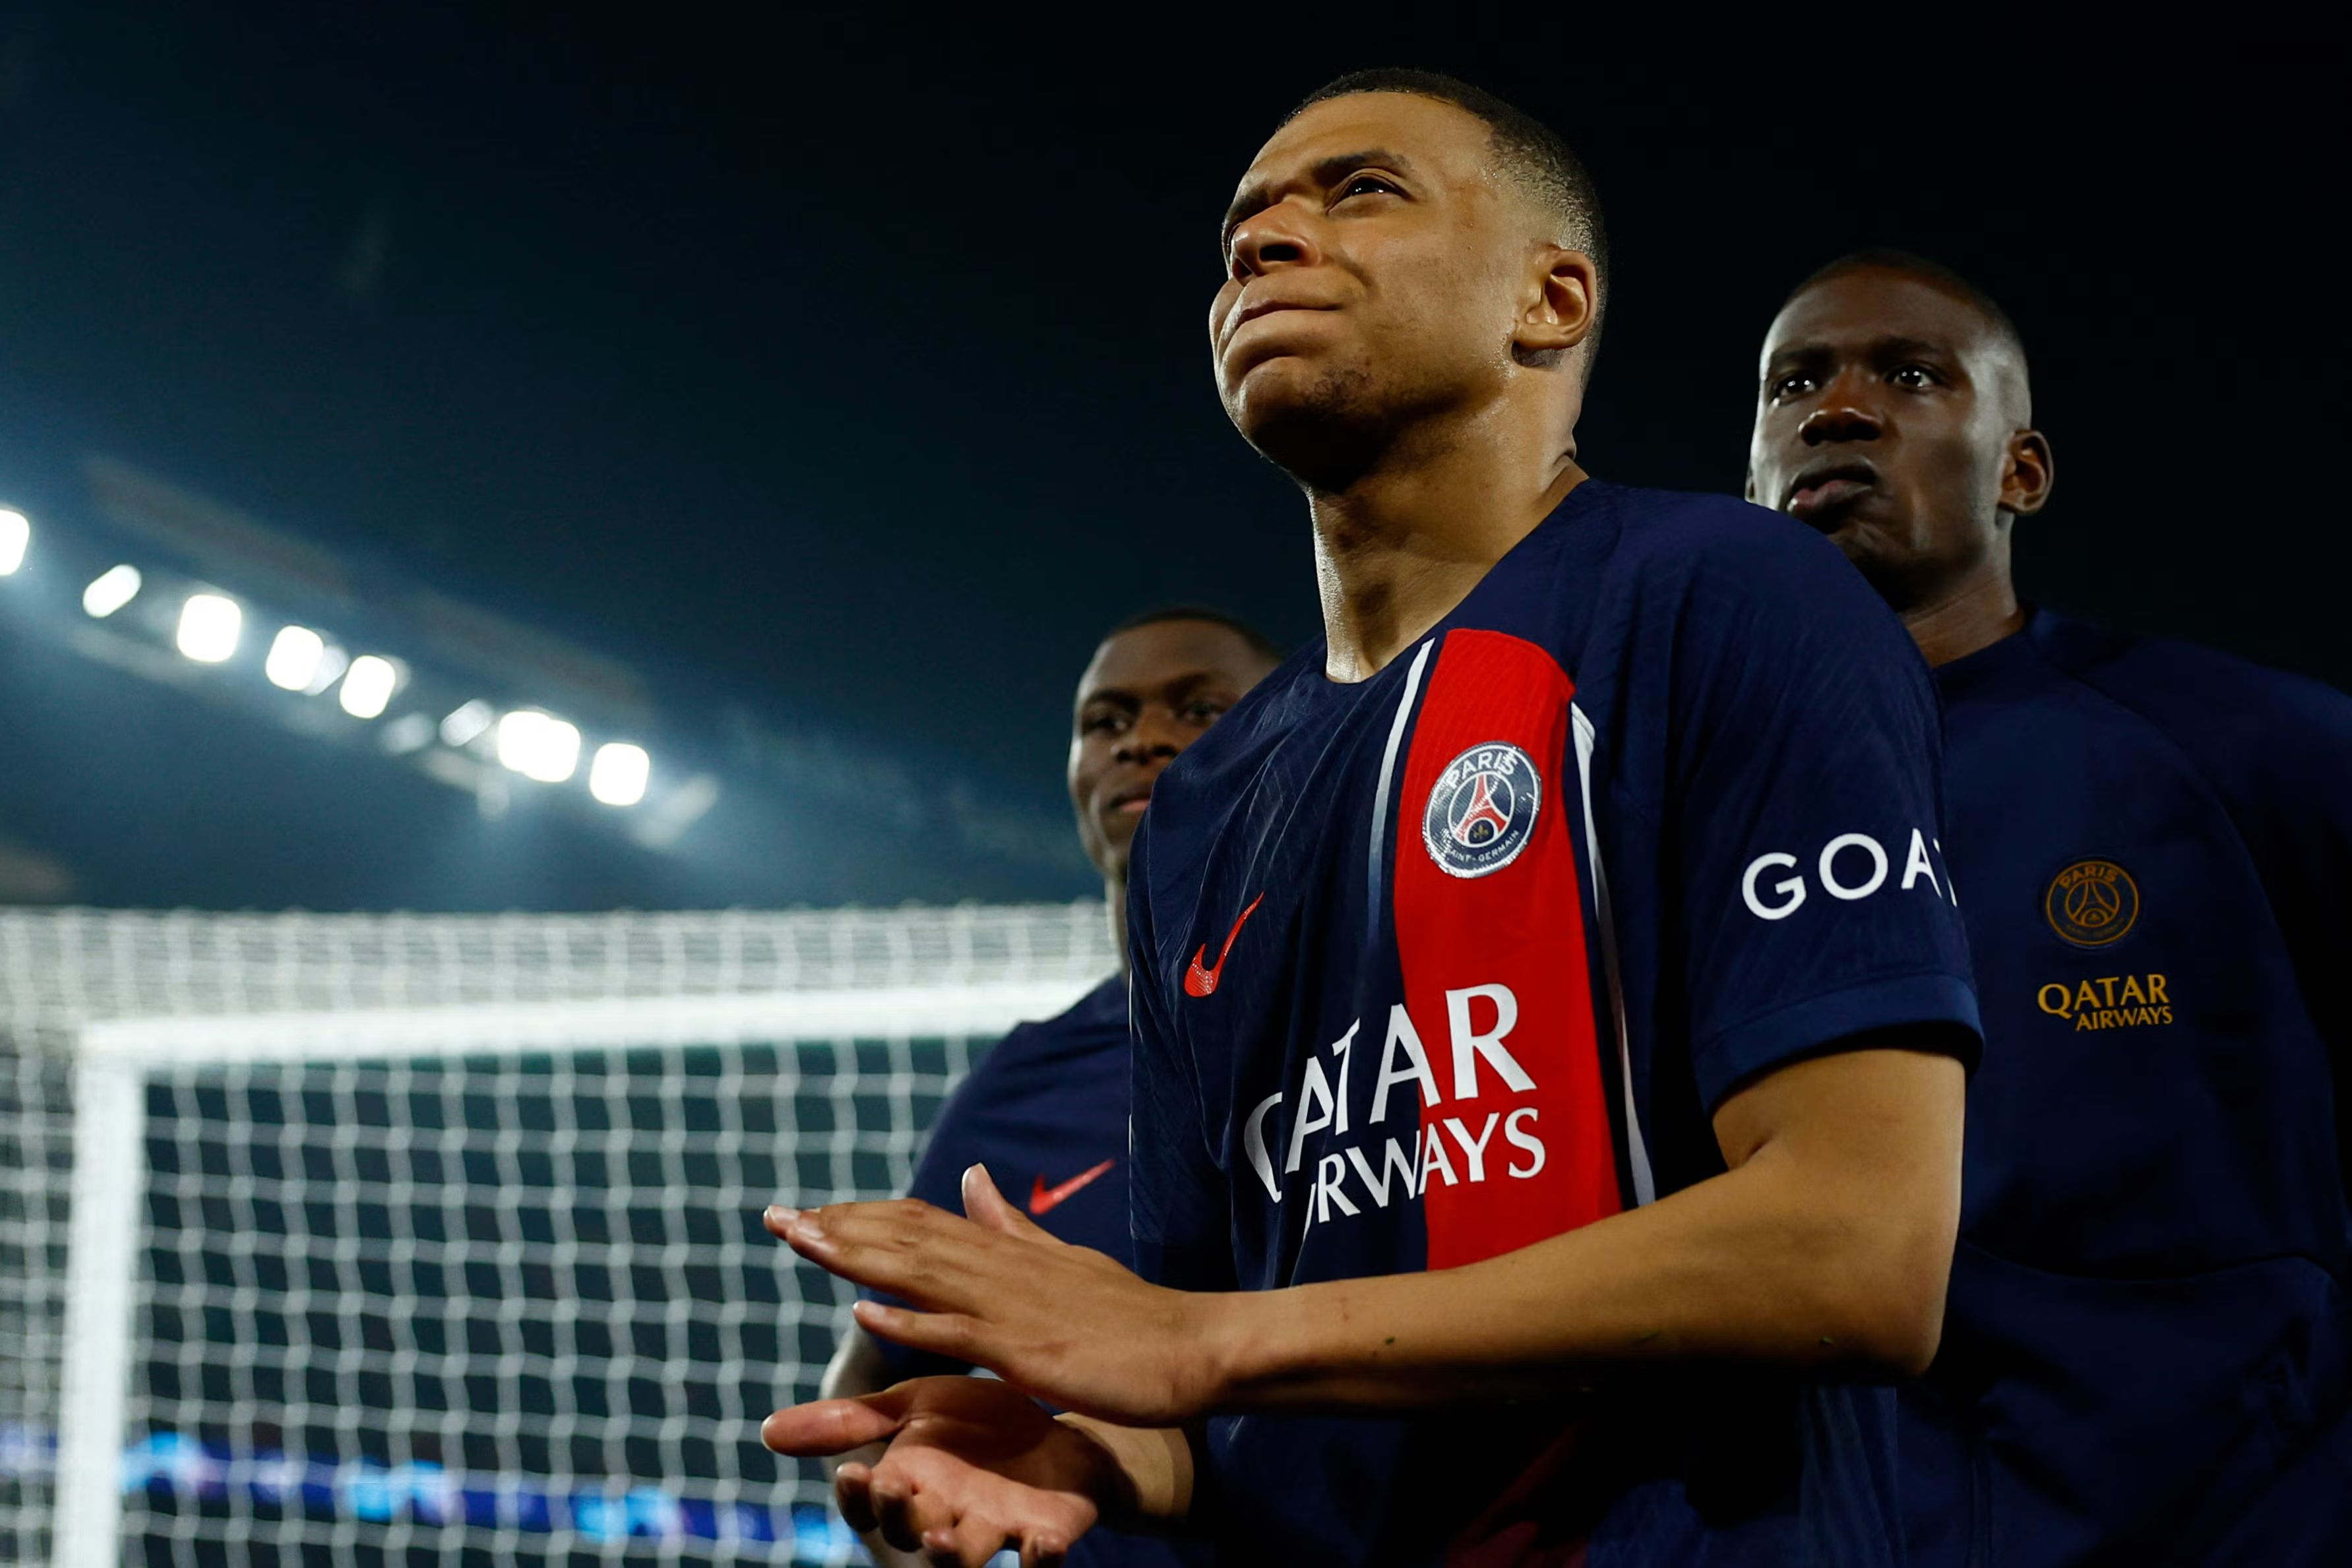 Kylian Mbappe to become Real Madrid’s highest paid player